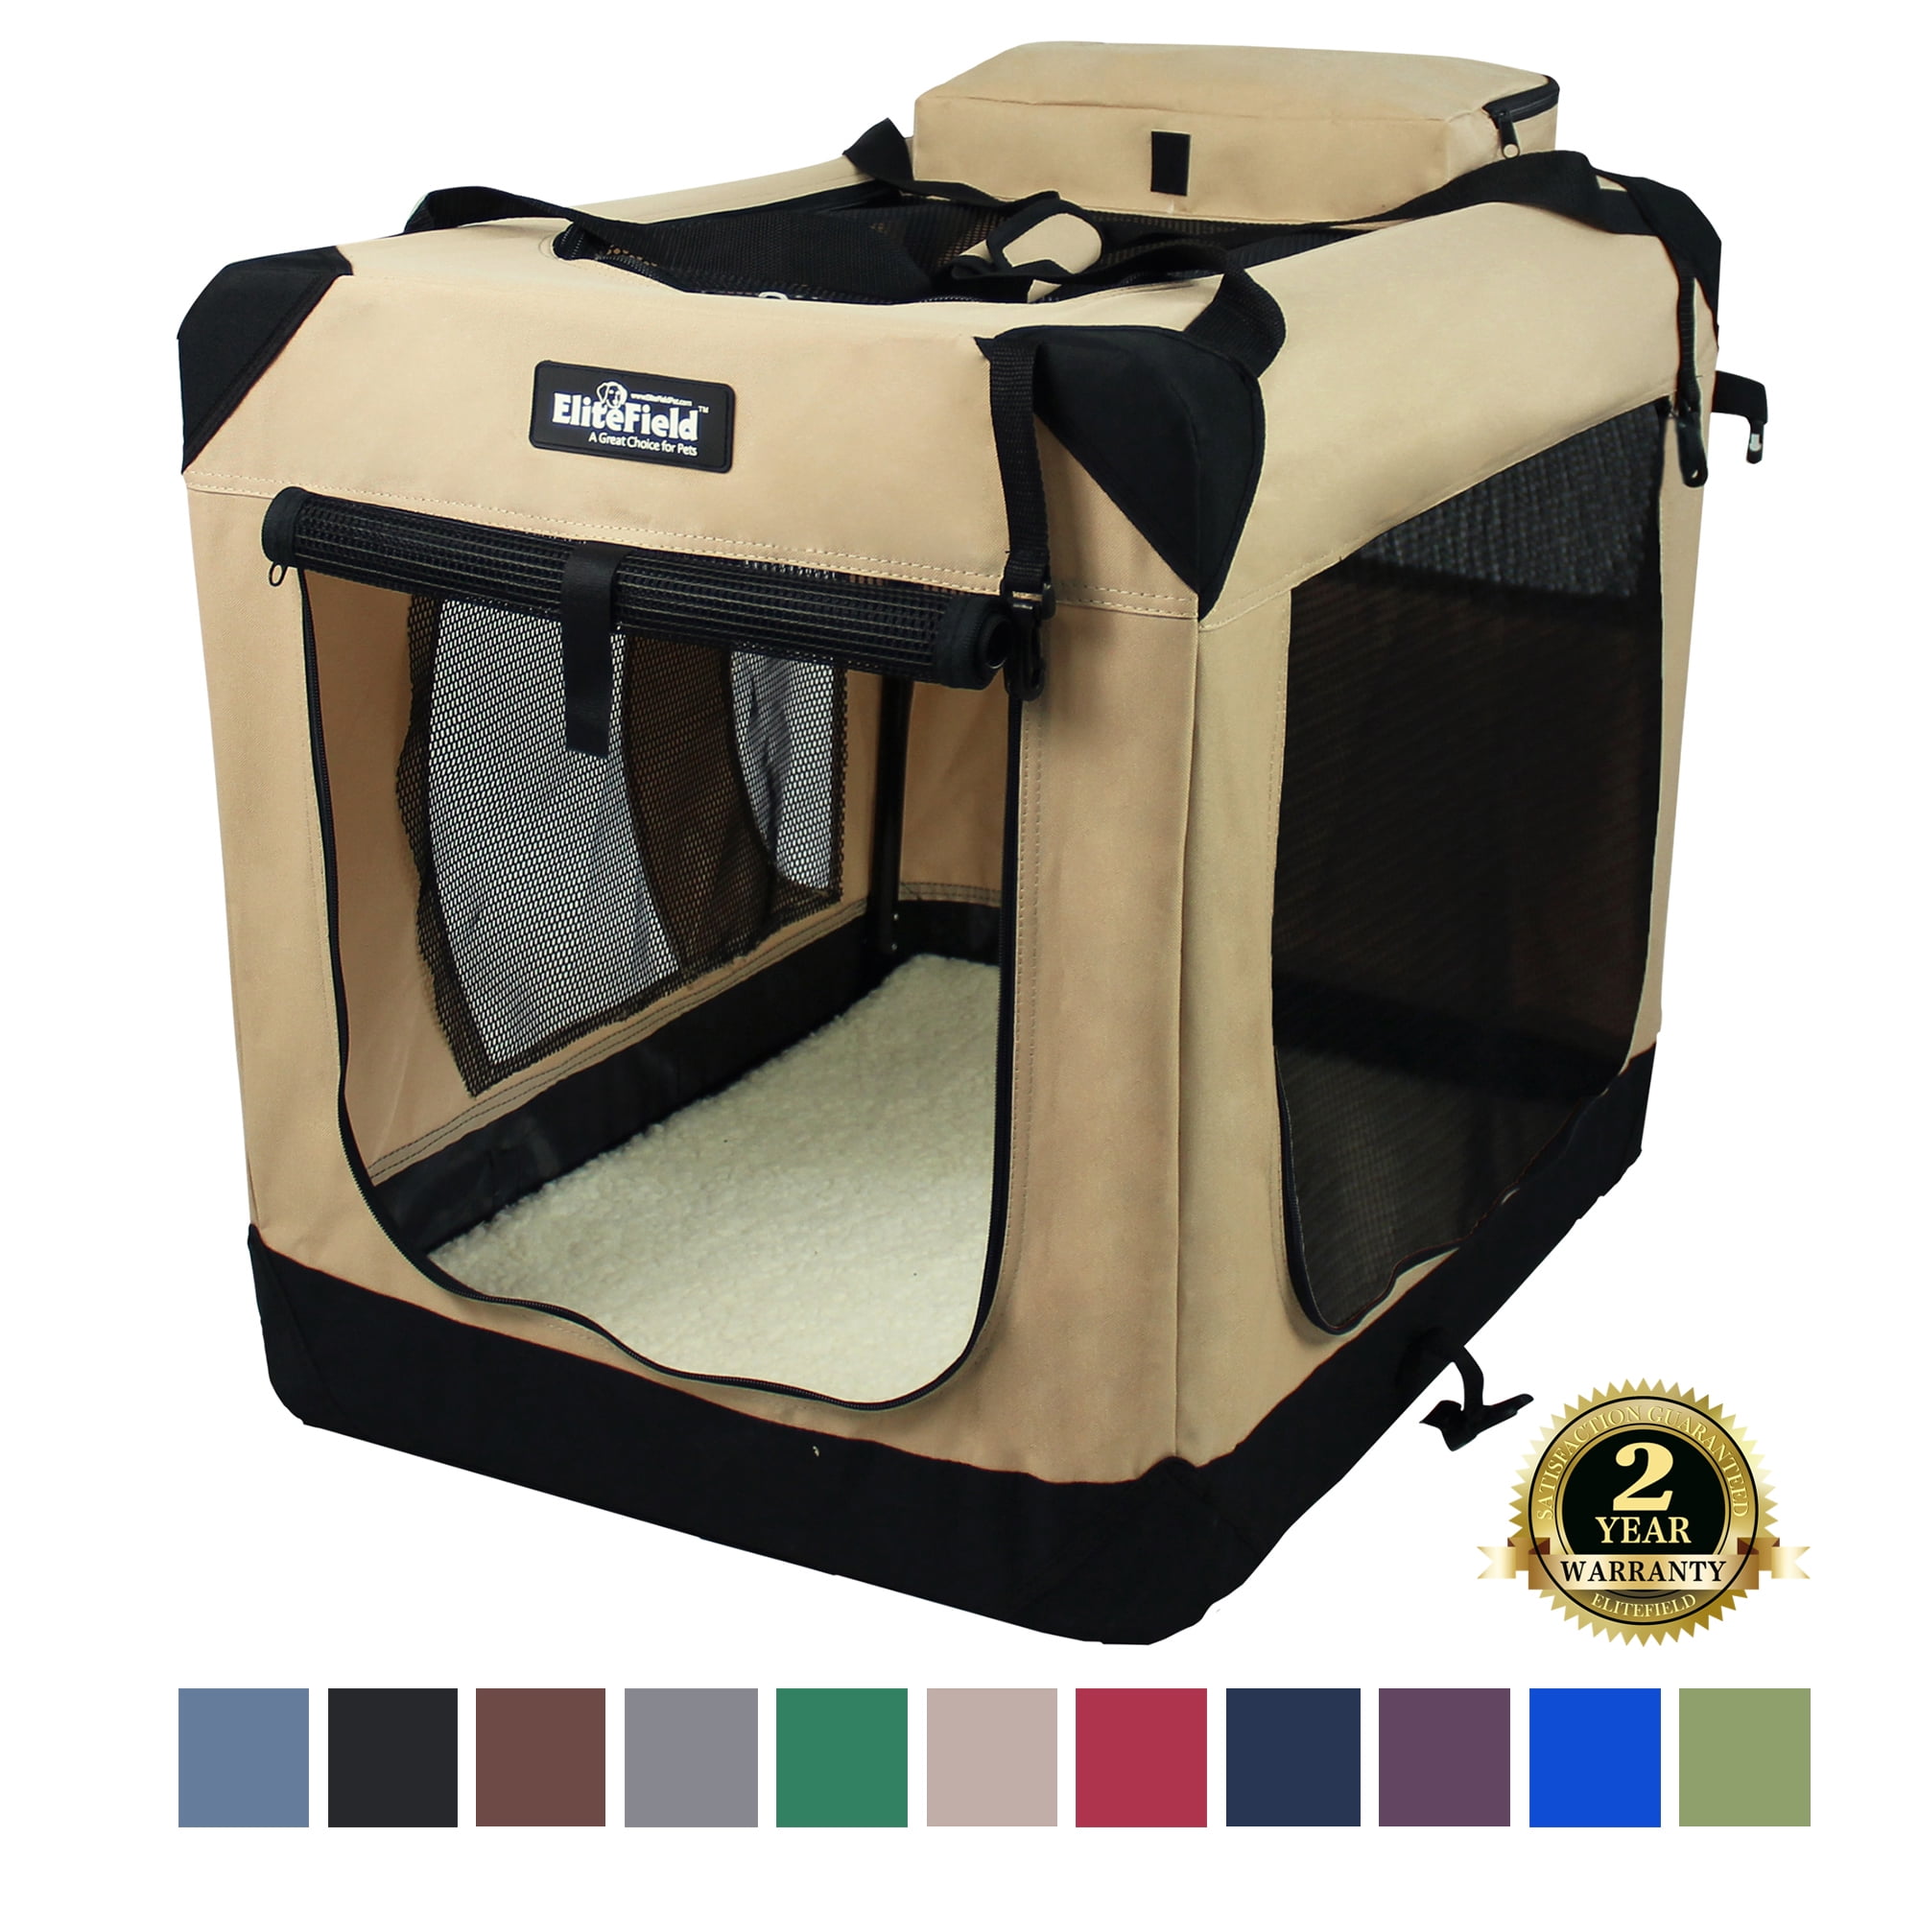 EliteField Soft Sided Pet Carrier (3 Year Warranty, Airline Approved), Multiple Sizes and Colors Available